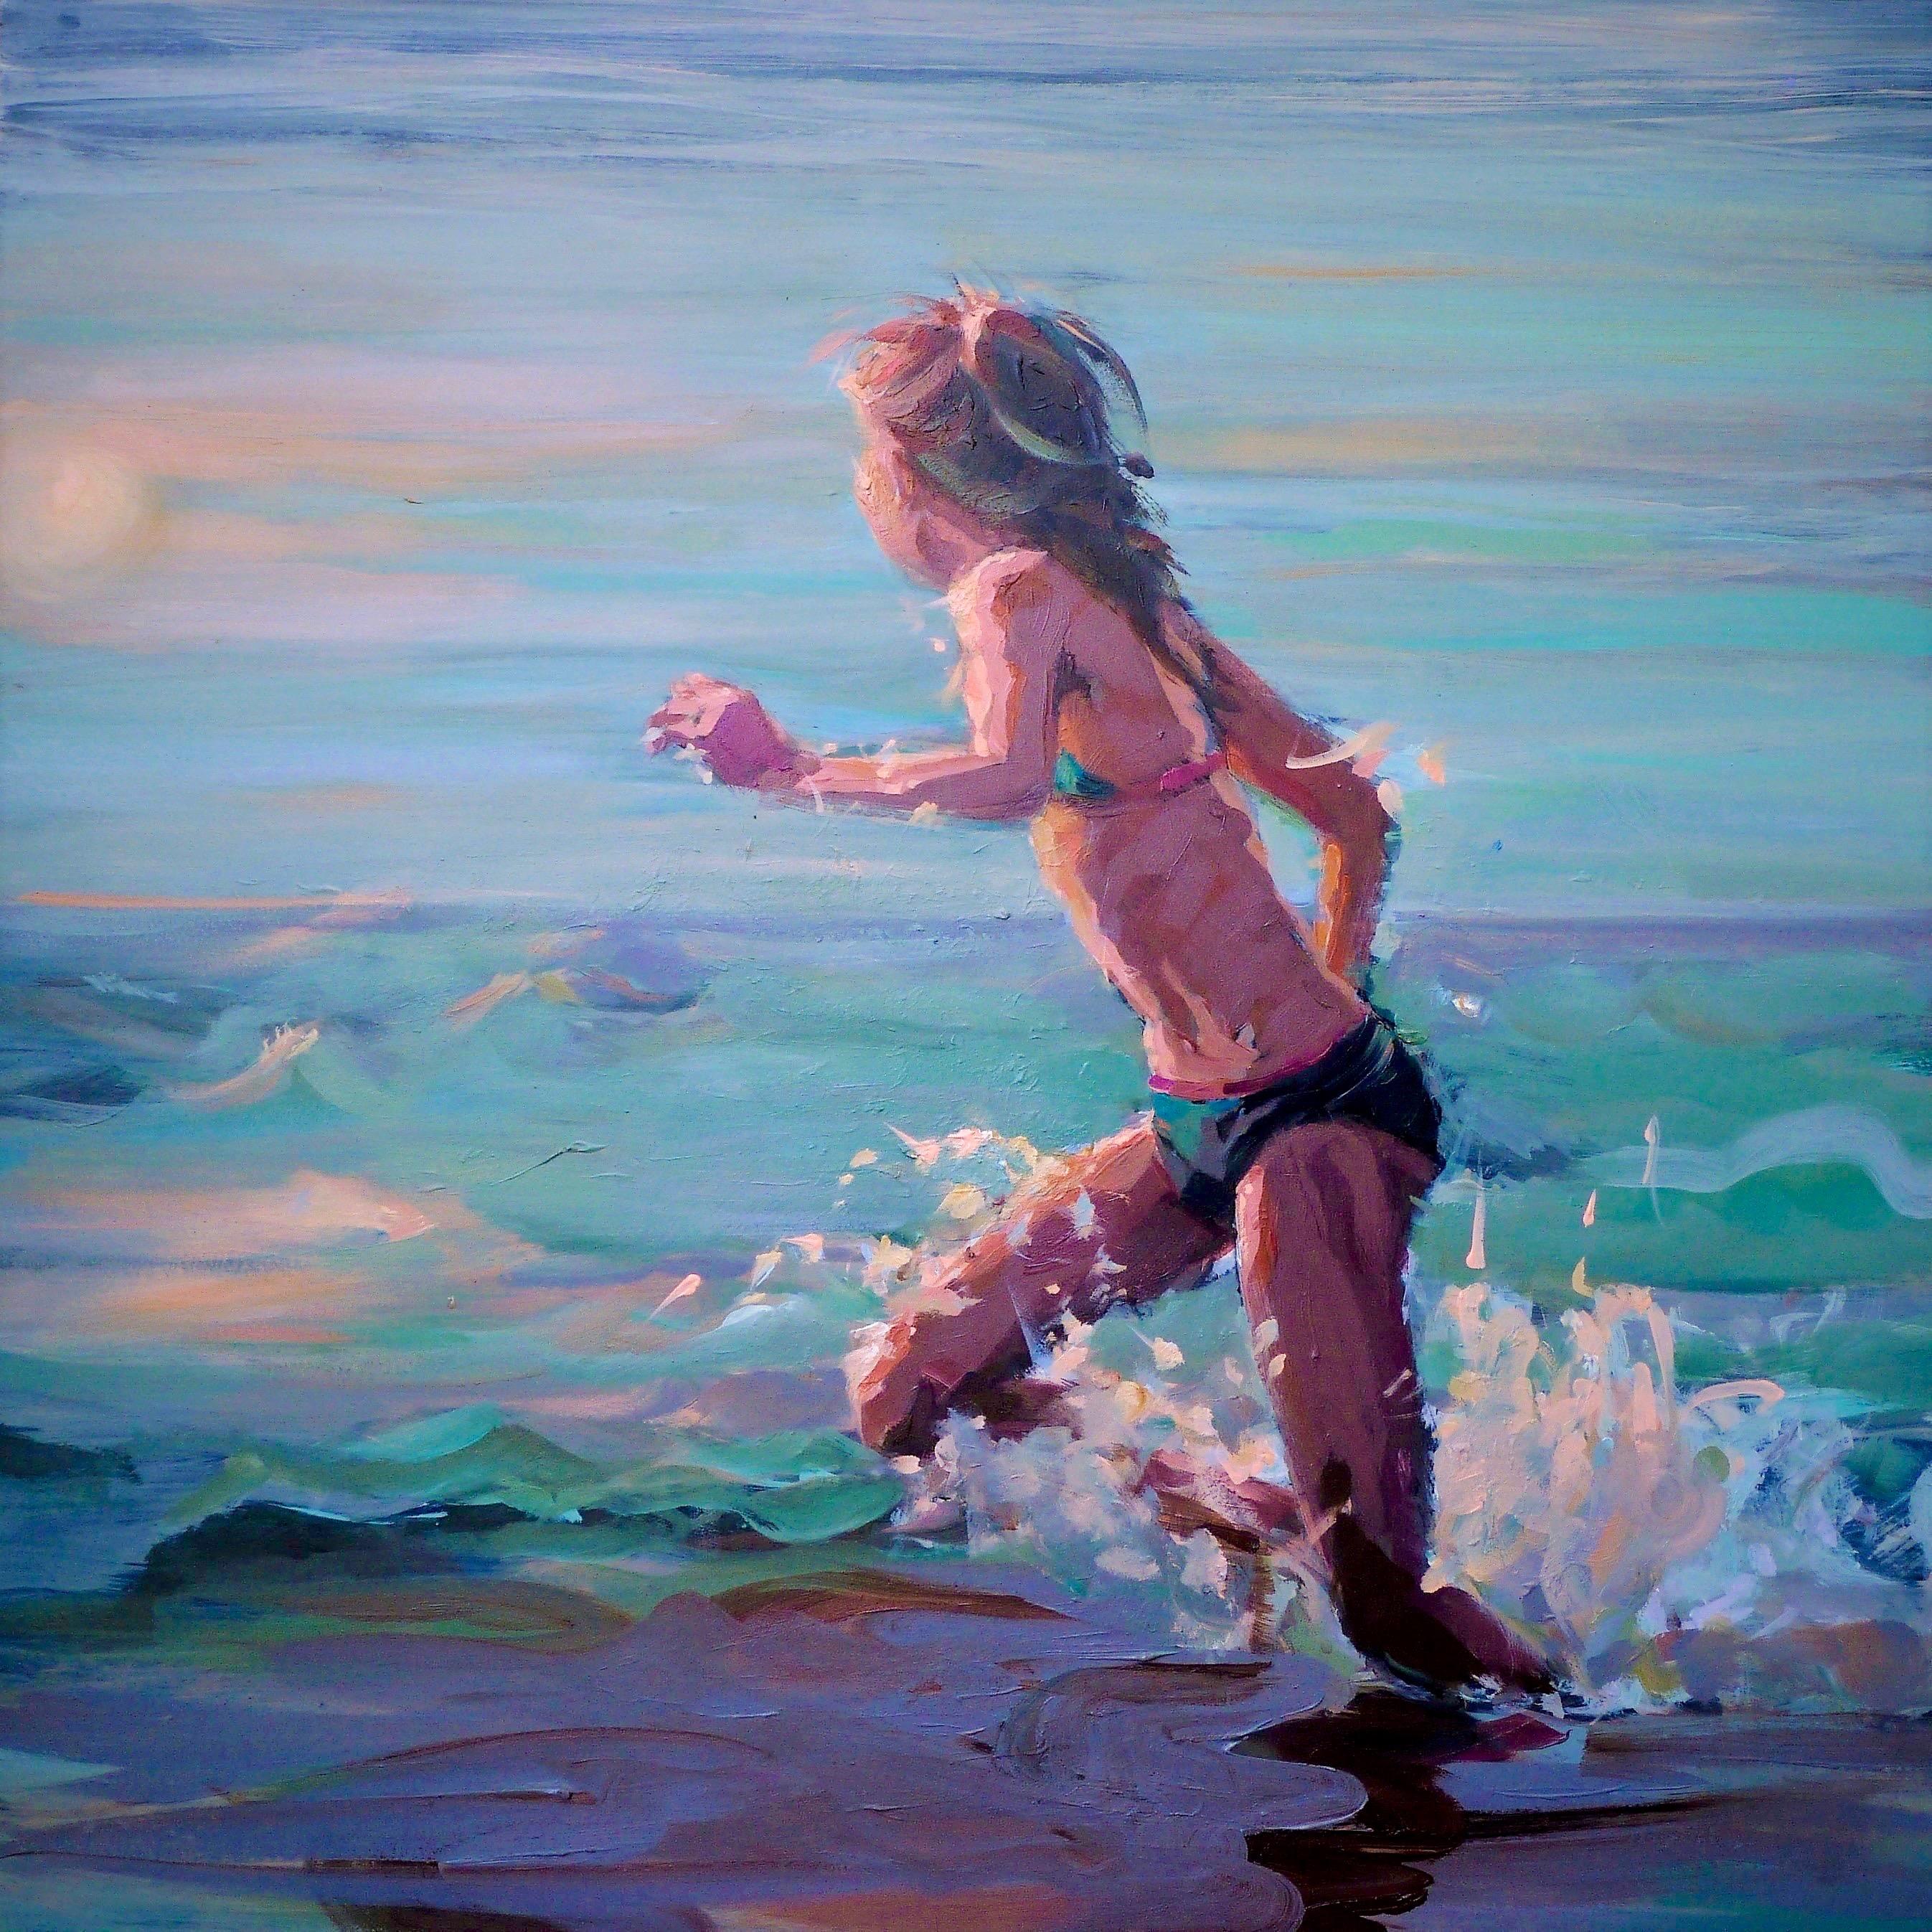 Mitzy Renooy made this painting in the summer of 2018. A girl running, playing in the water. 

This painting makes an impression due to the simplicity of the brushstrokes and the narrative that is told by artist Mitzy Renooy. Mitzy Renooy finds her